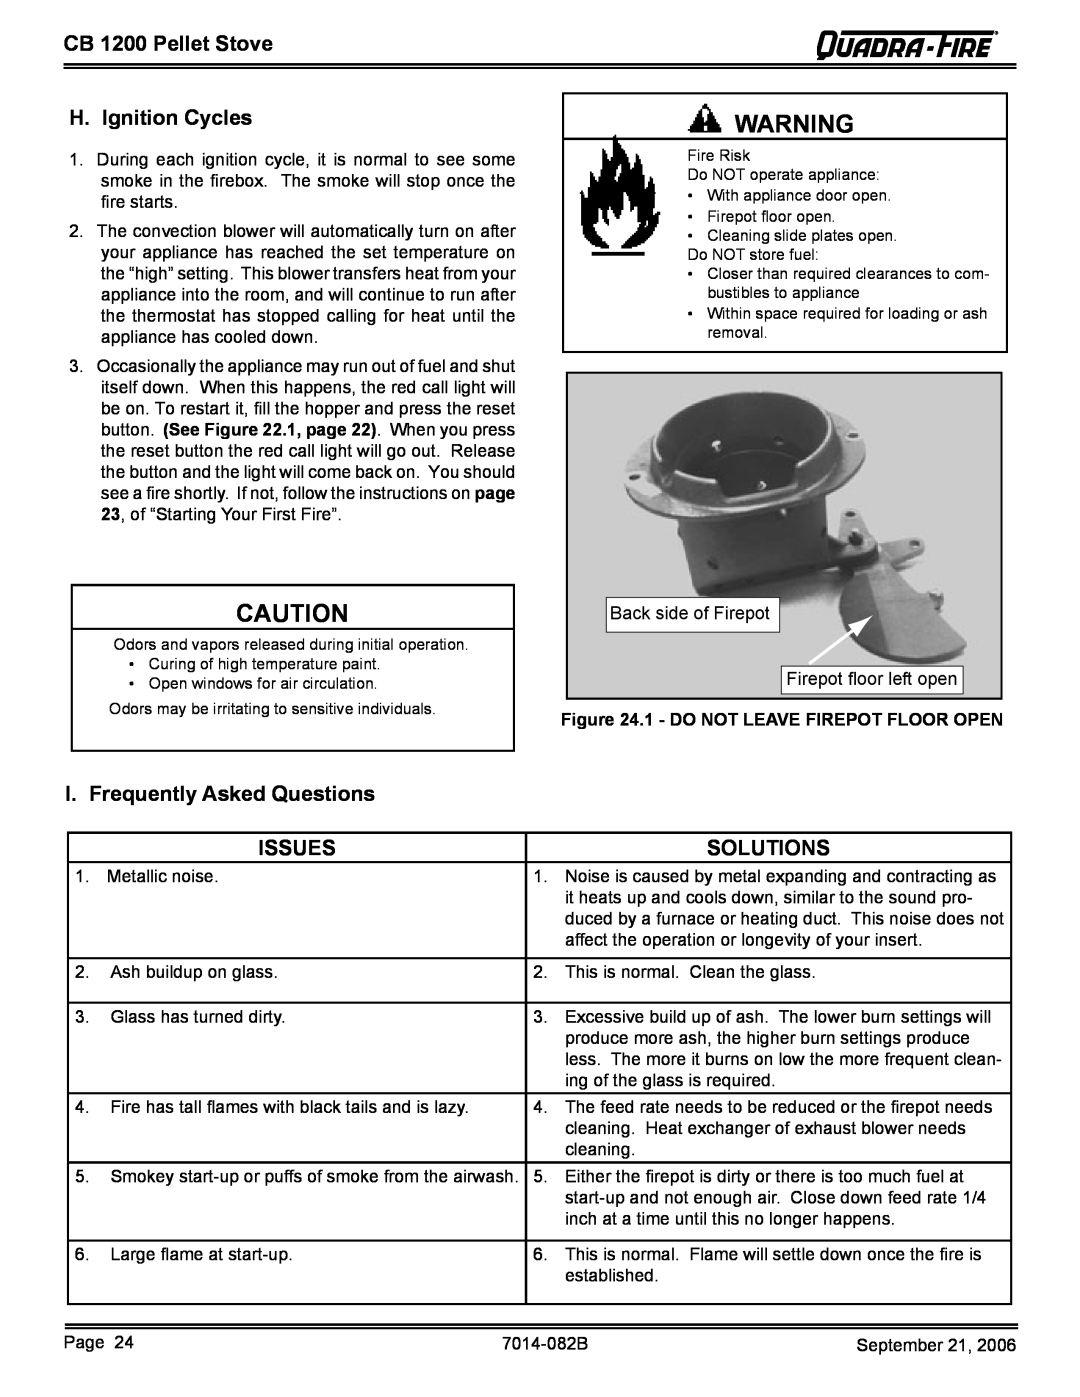 Quadra-Fire CB1200 owner manual H. Ignition Cycles, I. Frequently Asked Questions, Issues, Solutions, CB 1200 Pellet Stove 